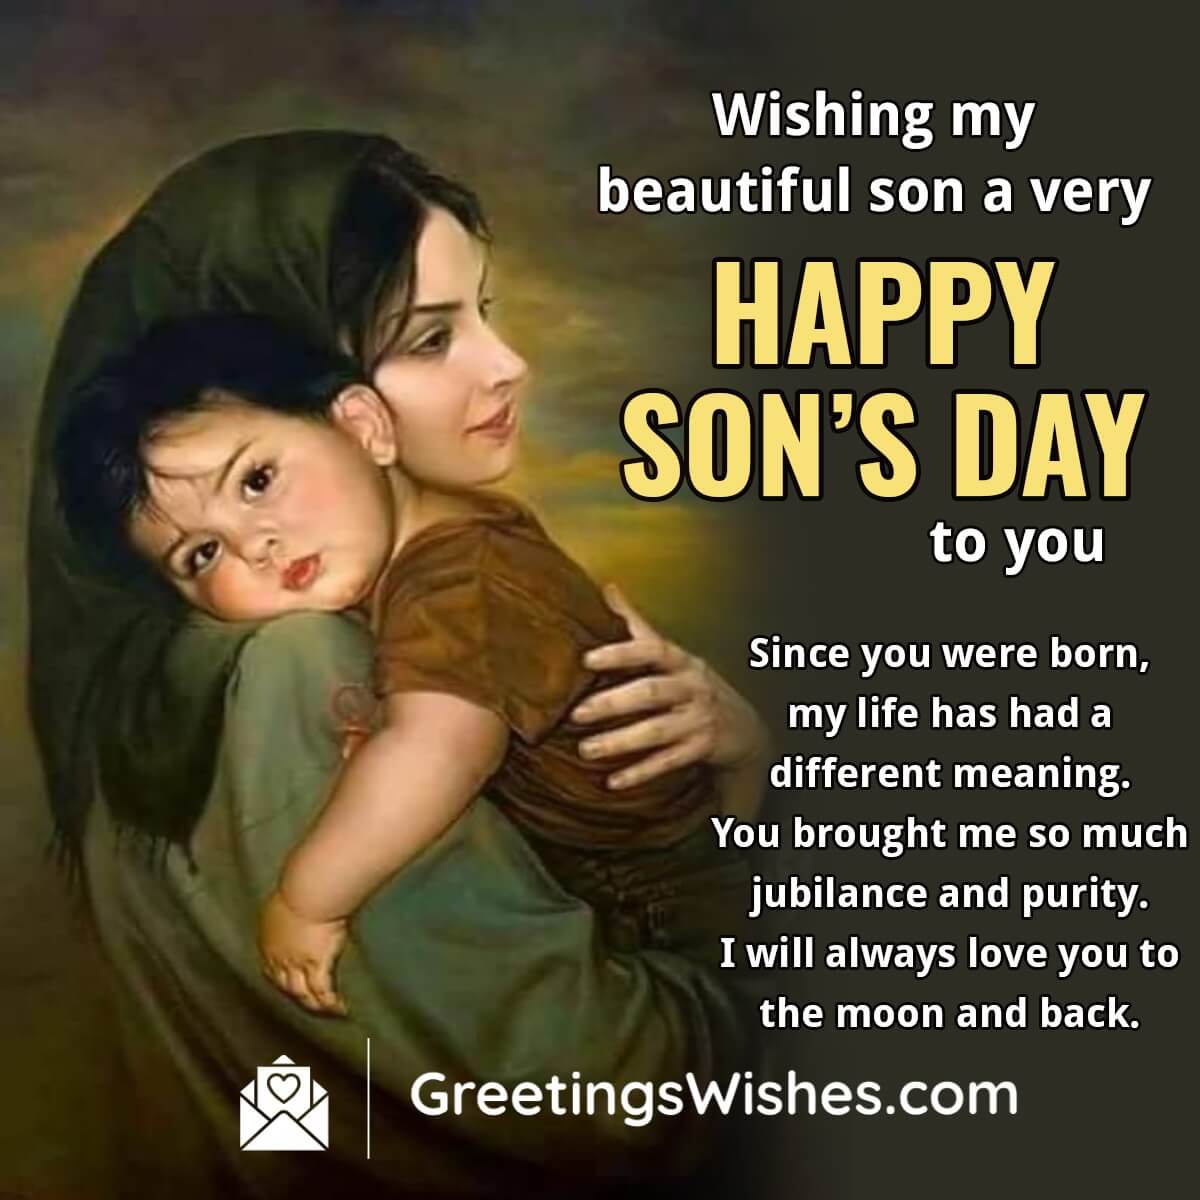 Happy Son’s Day Wishes From Mom